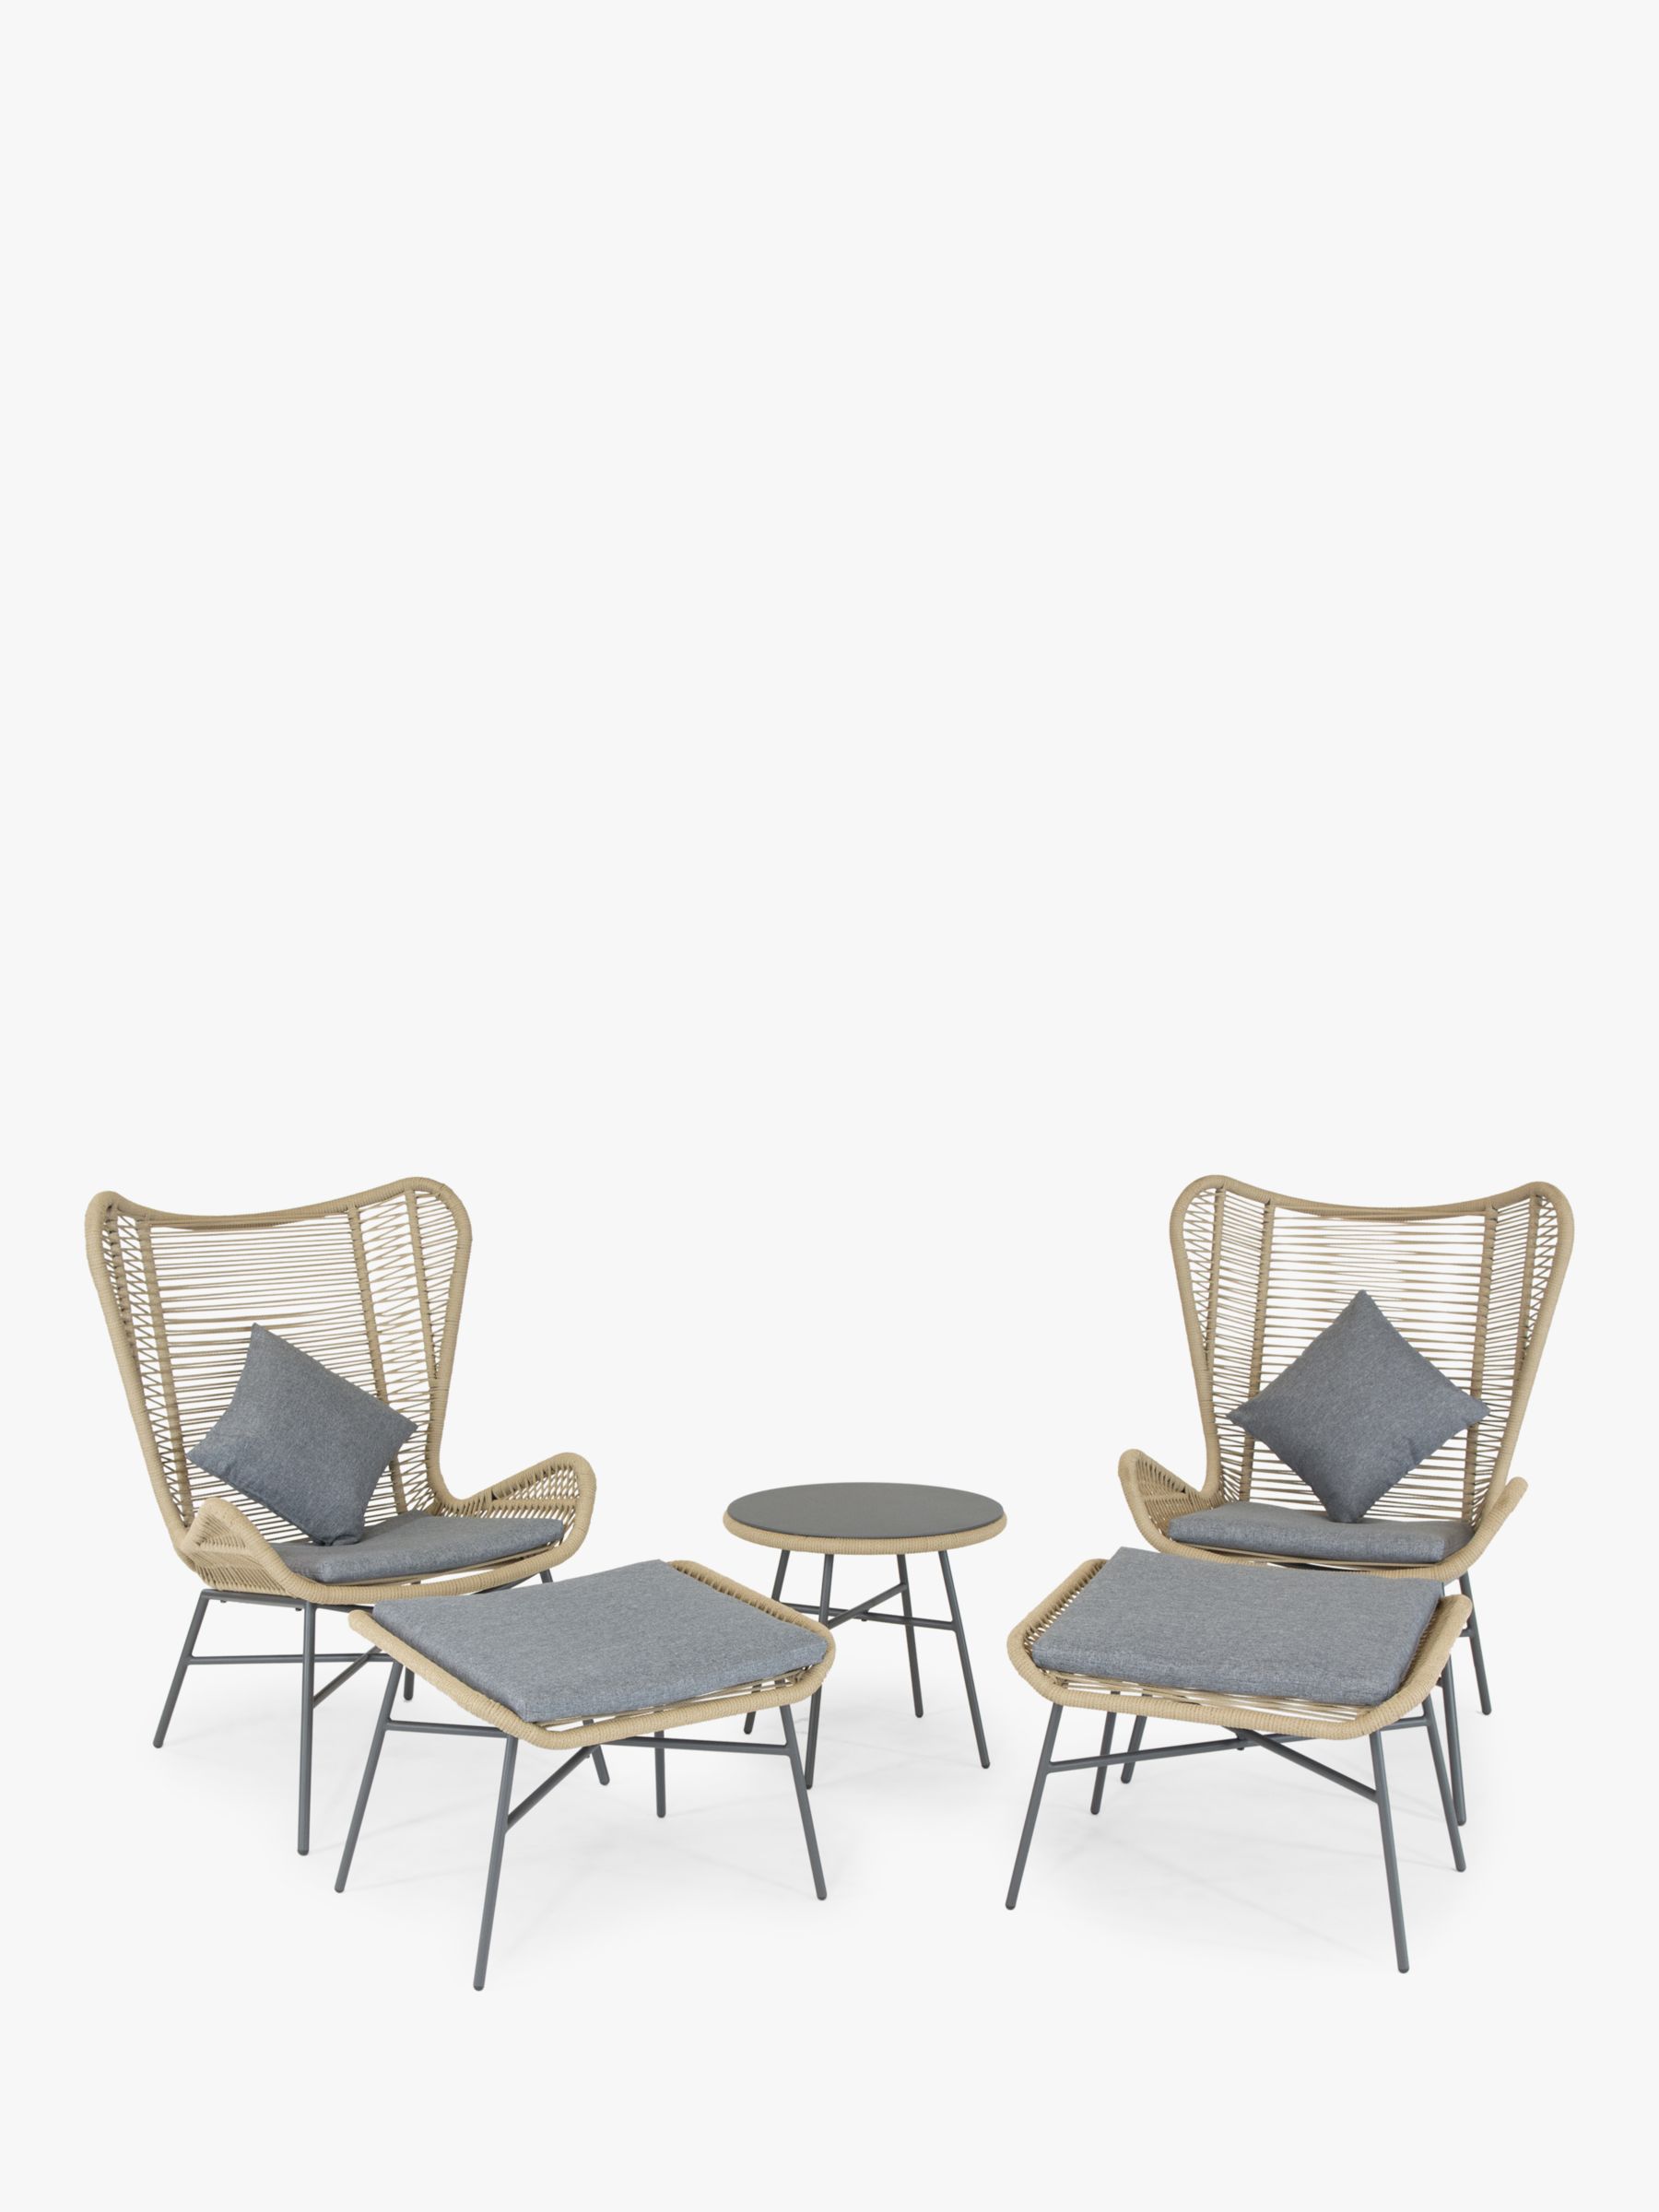 Photo of Menos by kettler lyon 2-seater garden lounging side table & chairs set natural